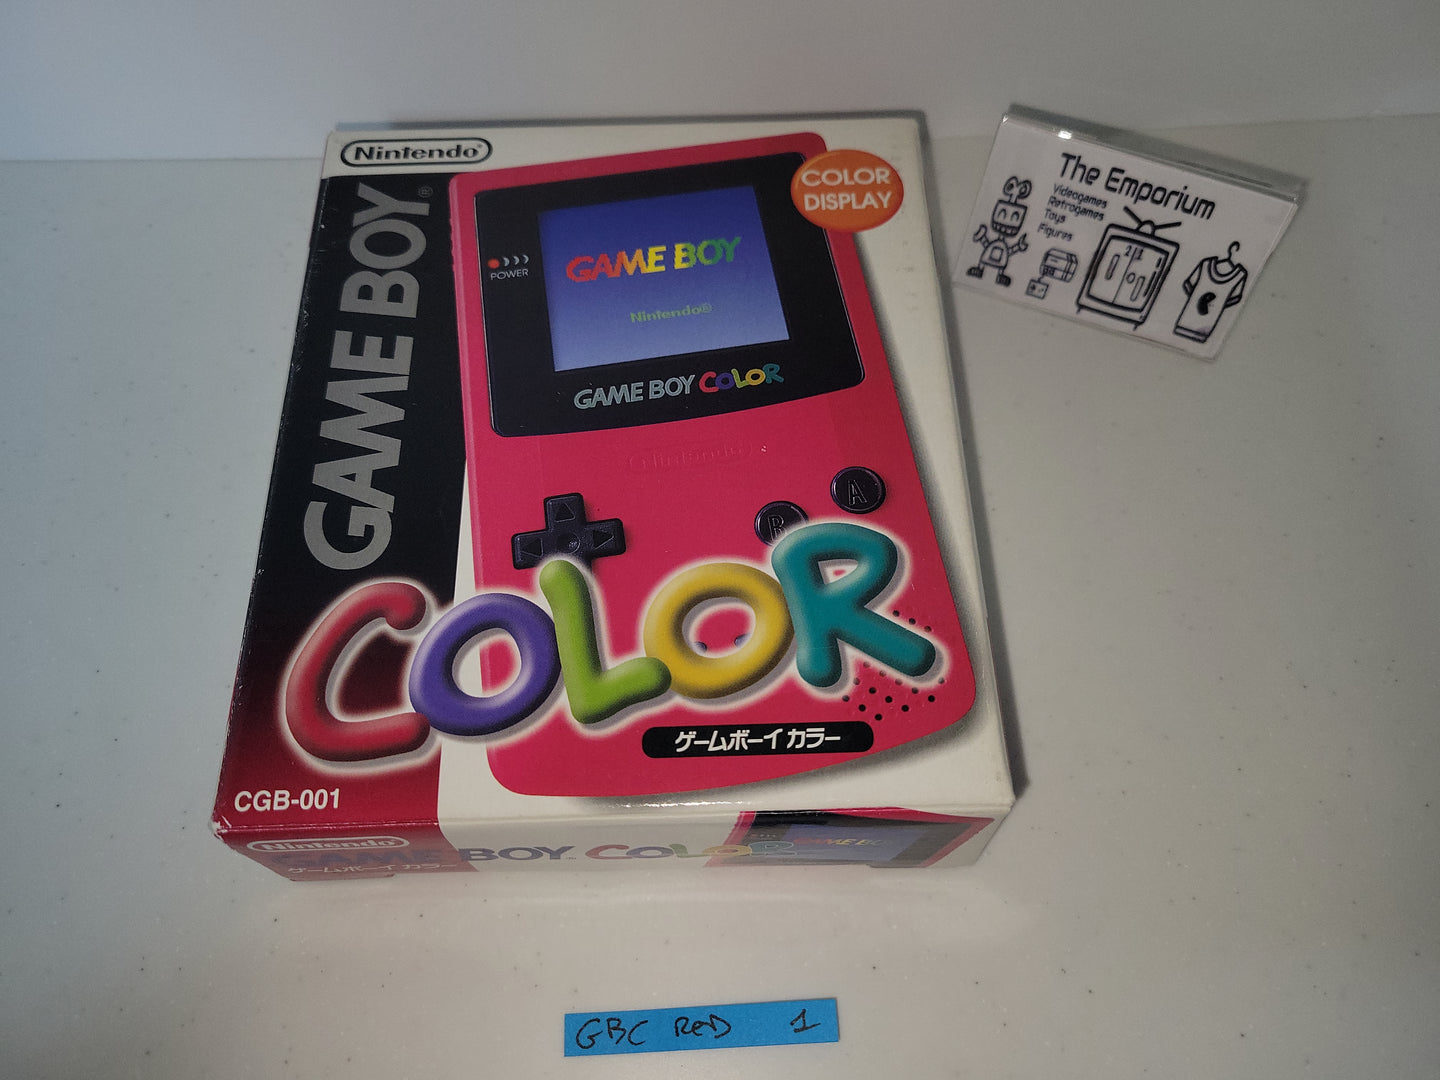 GameBoy Color Console -Red- - Nintendo GB GameBoy